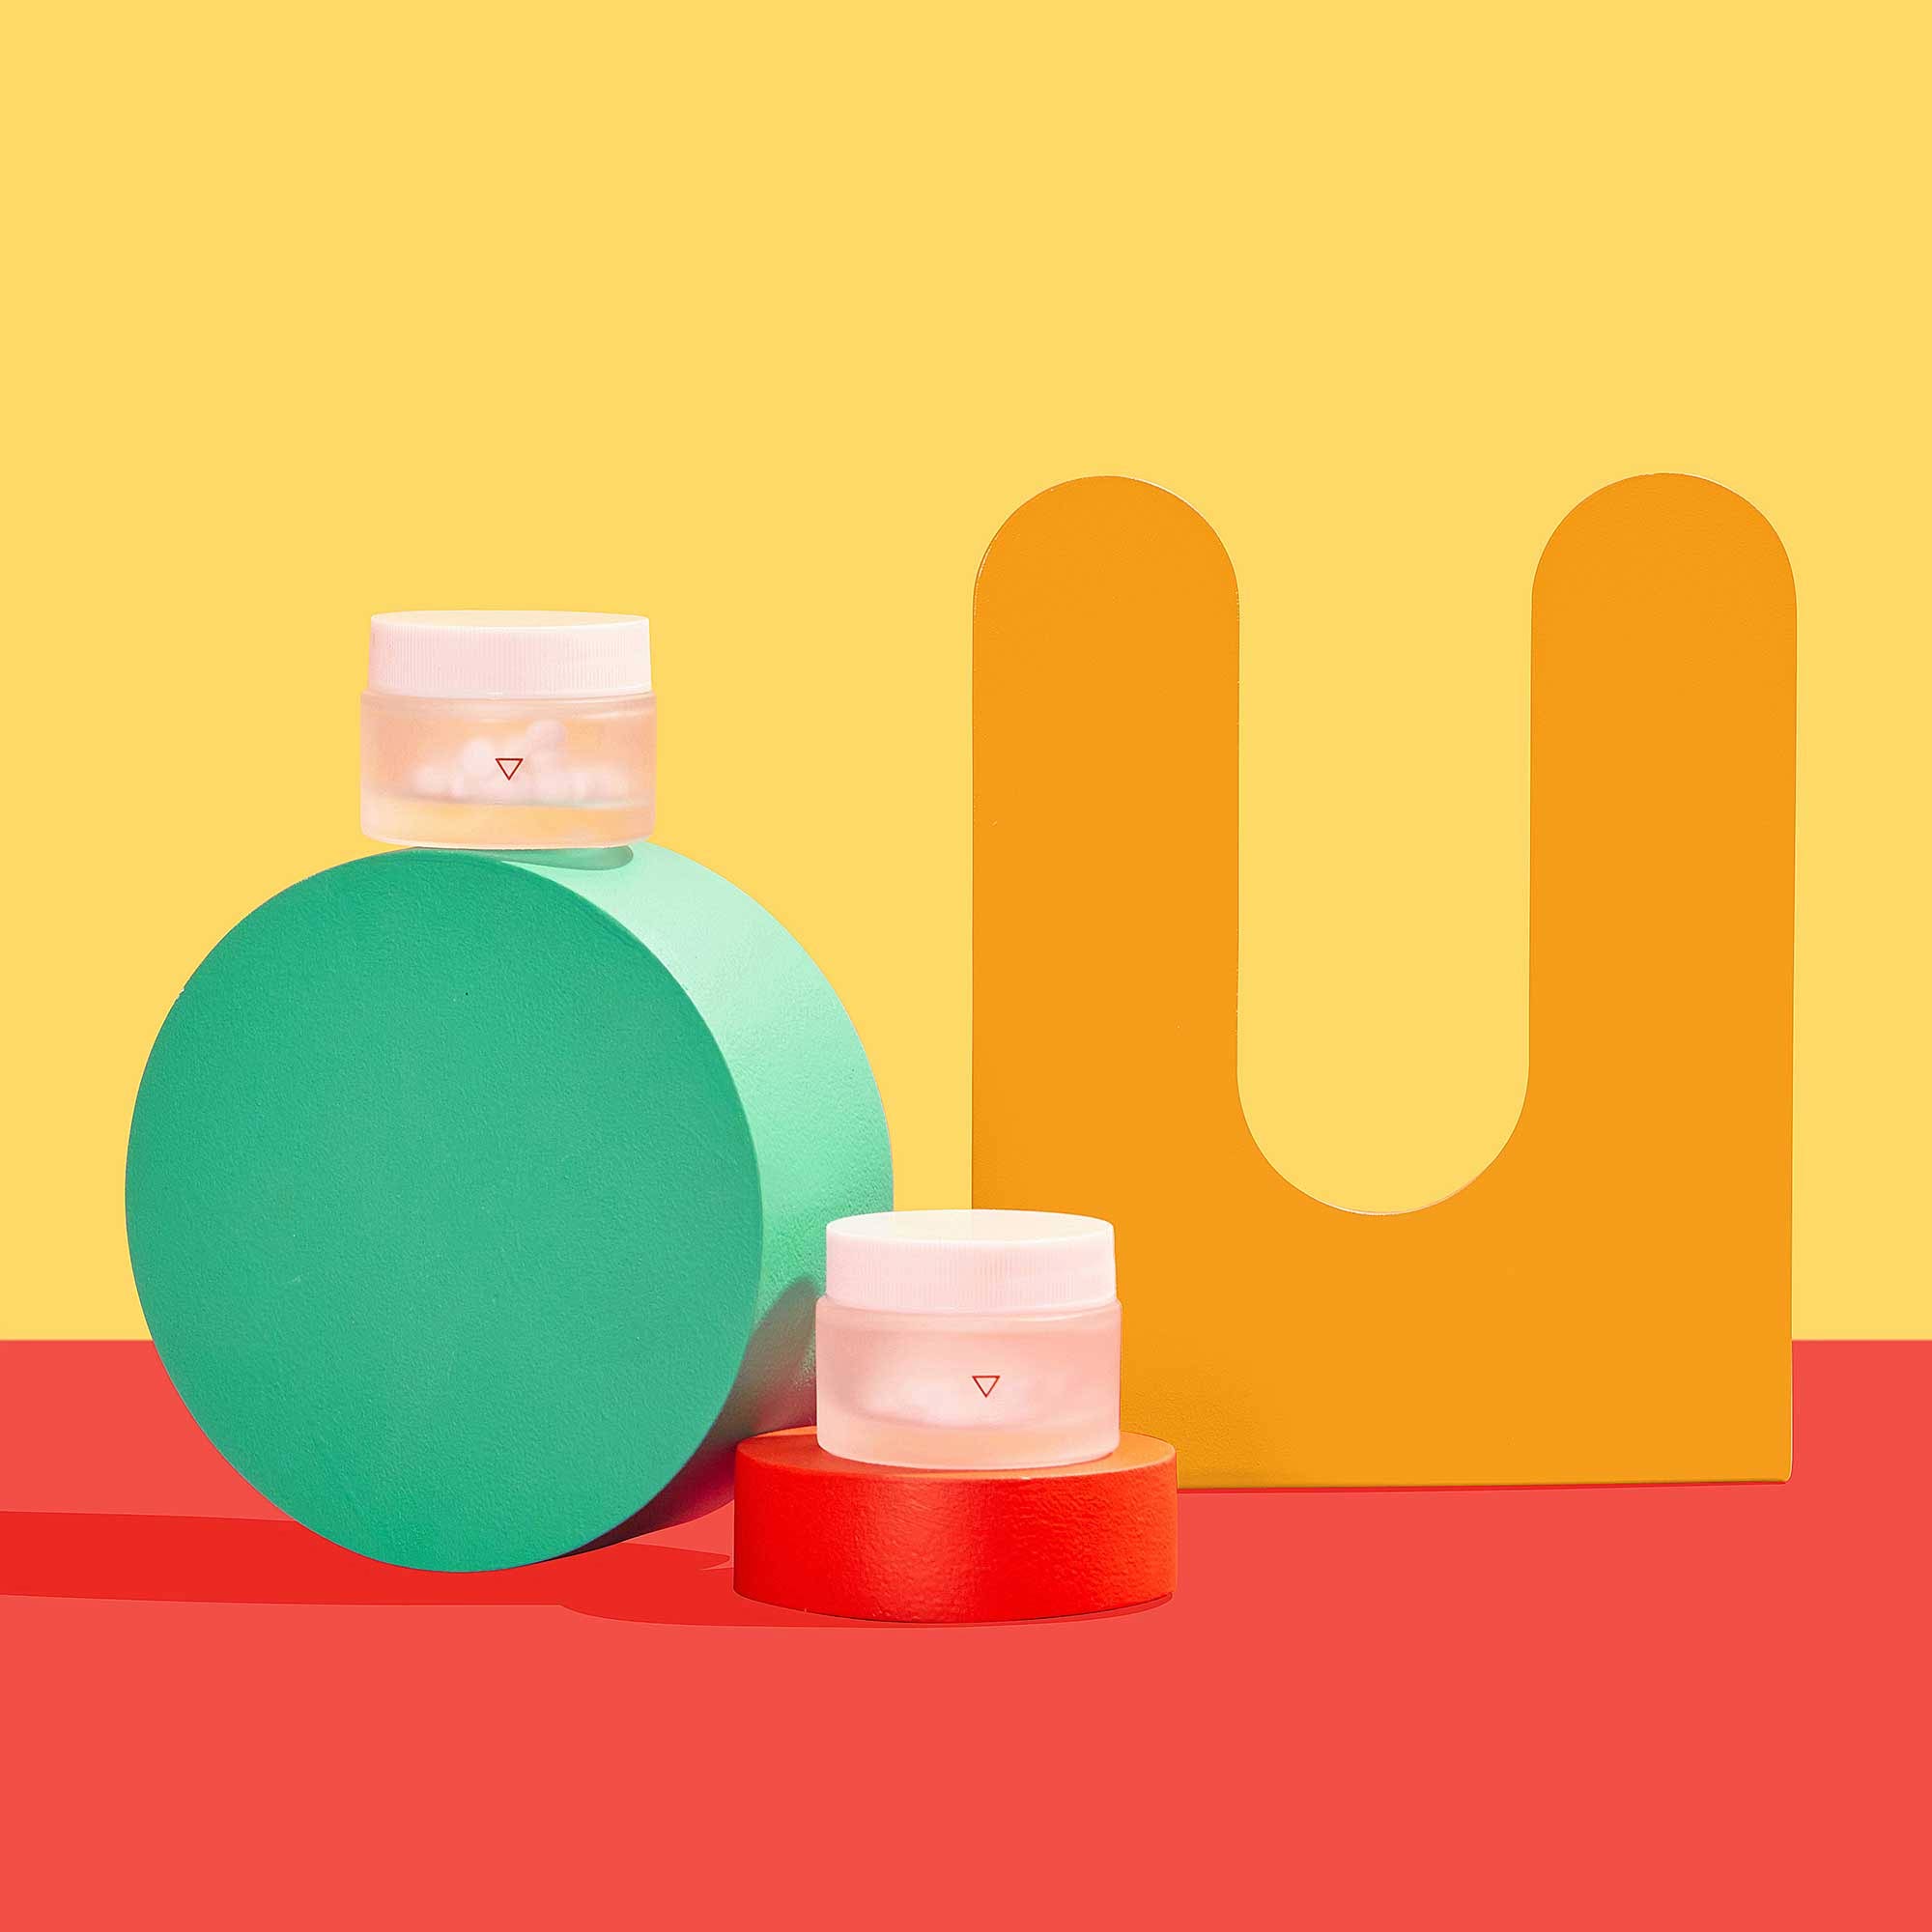 Pill bottles on red and yellow background with colorful geometric shapes